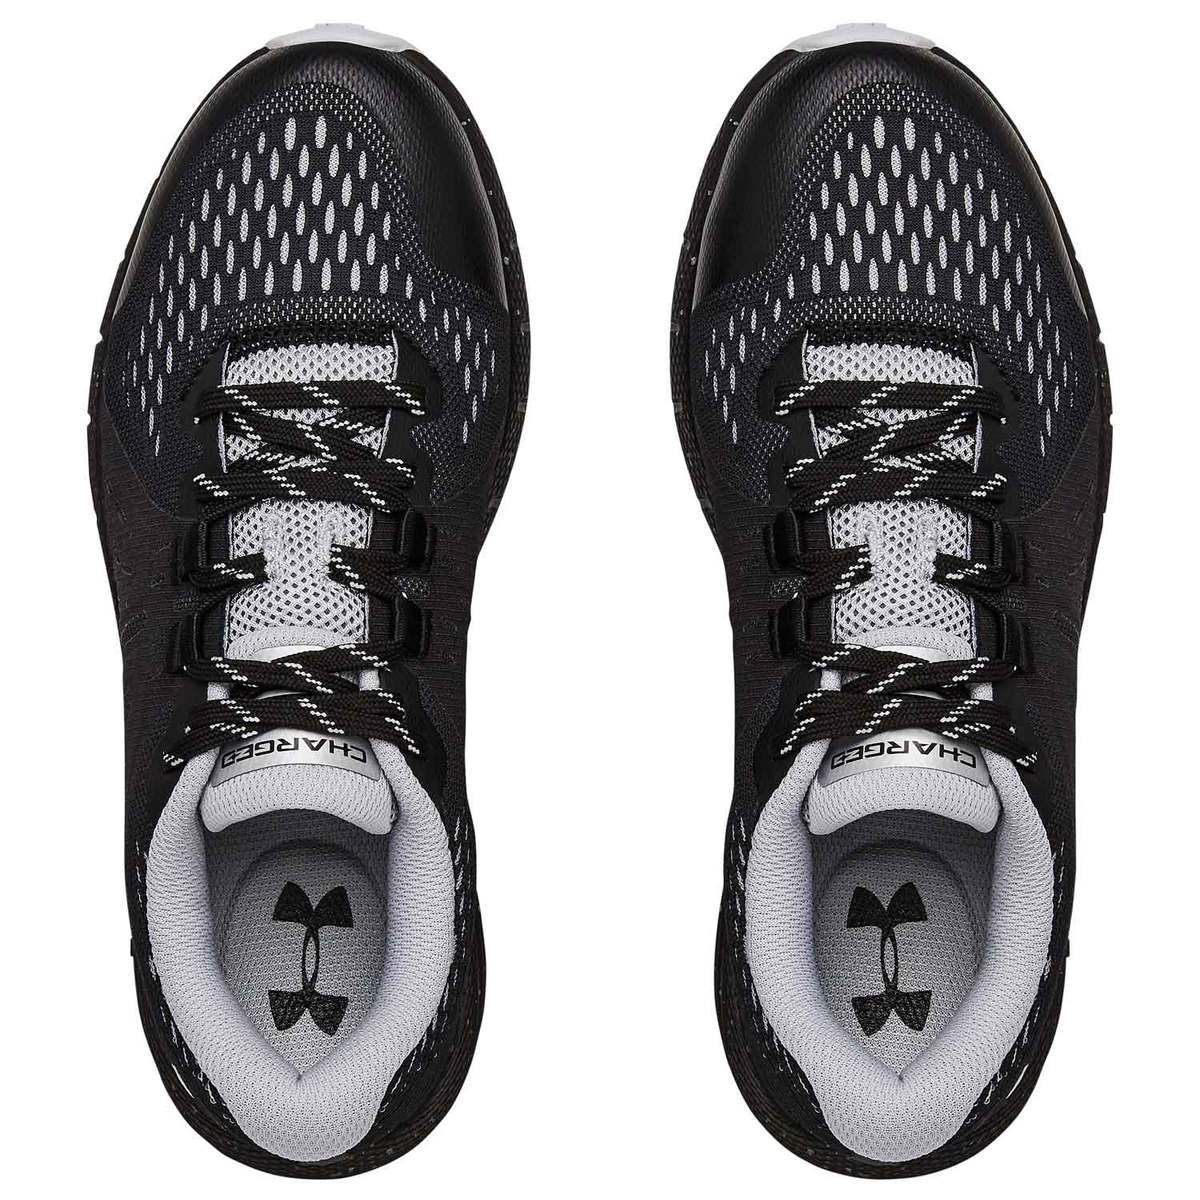 Under Armour Women's Charged Bandit Trail Running Shoes - Black - Size ...